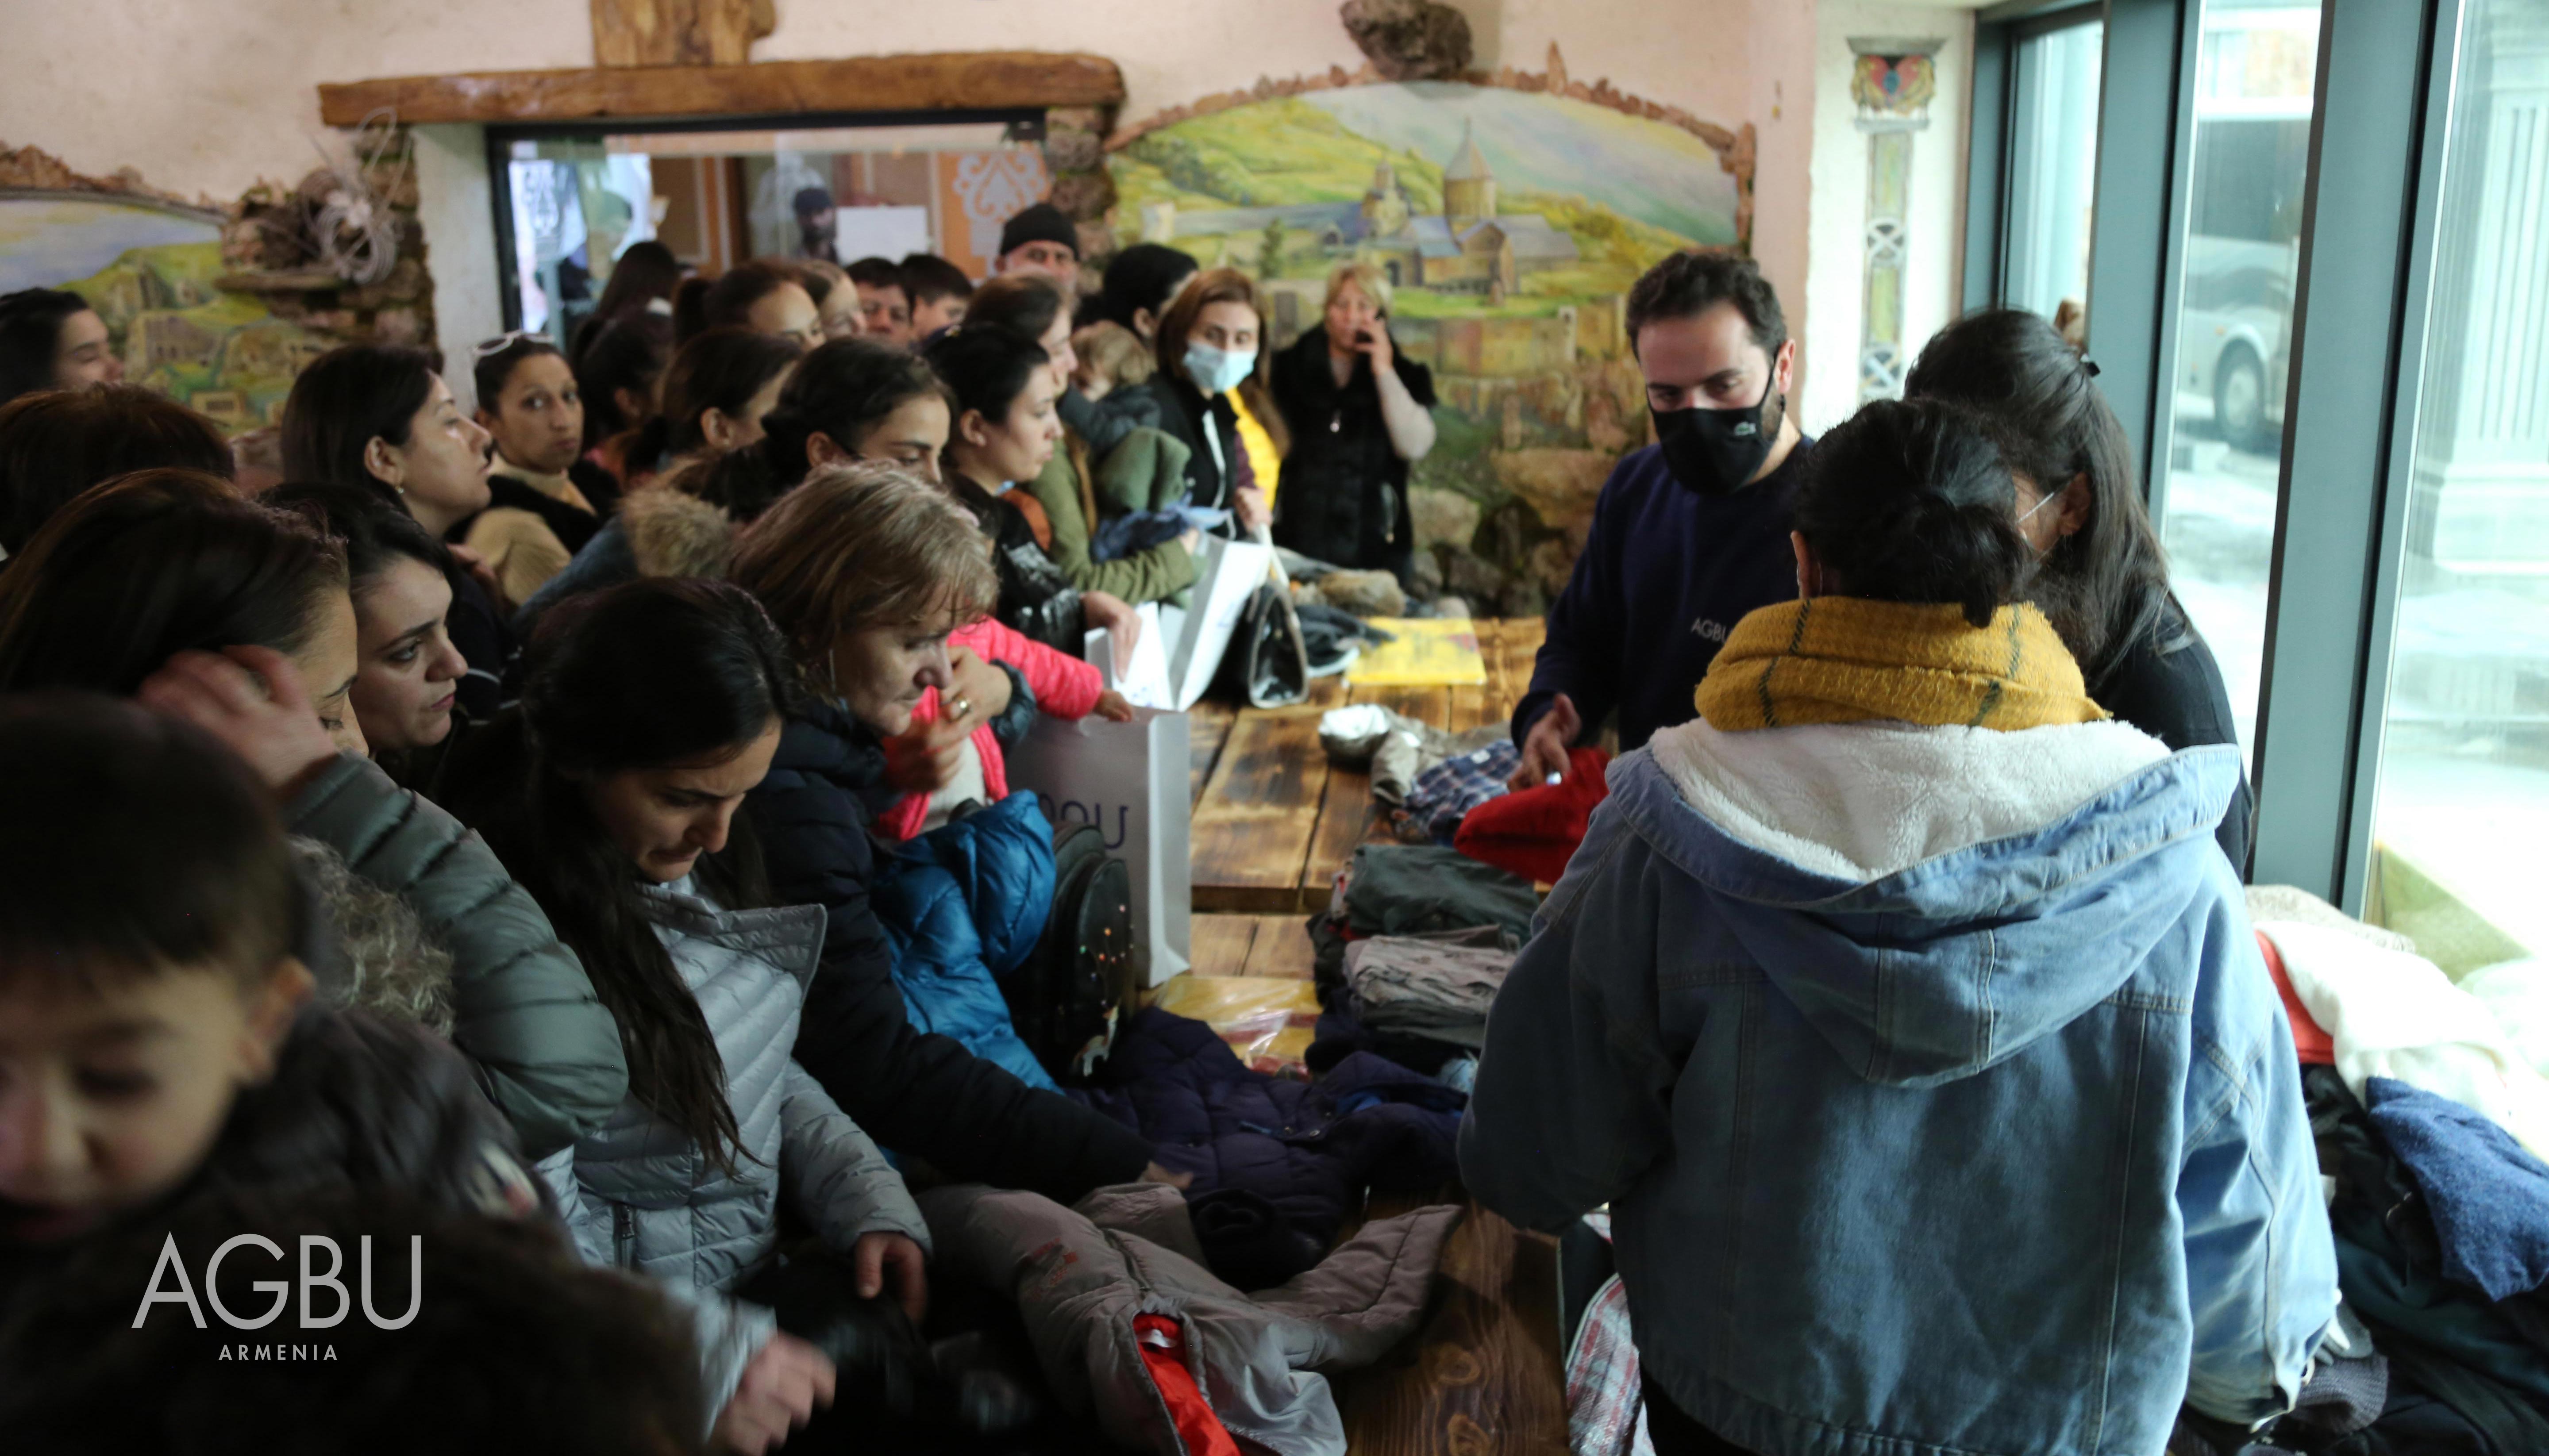 AGBU France Missions of Volunteers to Armenia Provide Needed Support to Families in Armenia & Artsakh